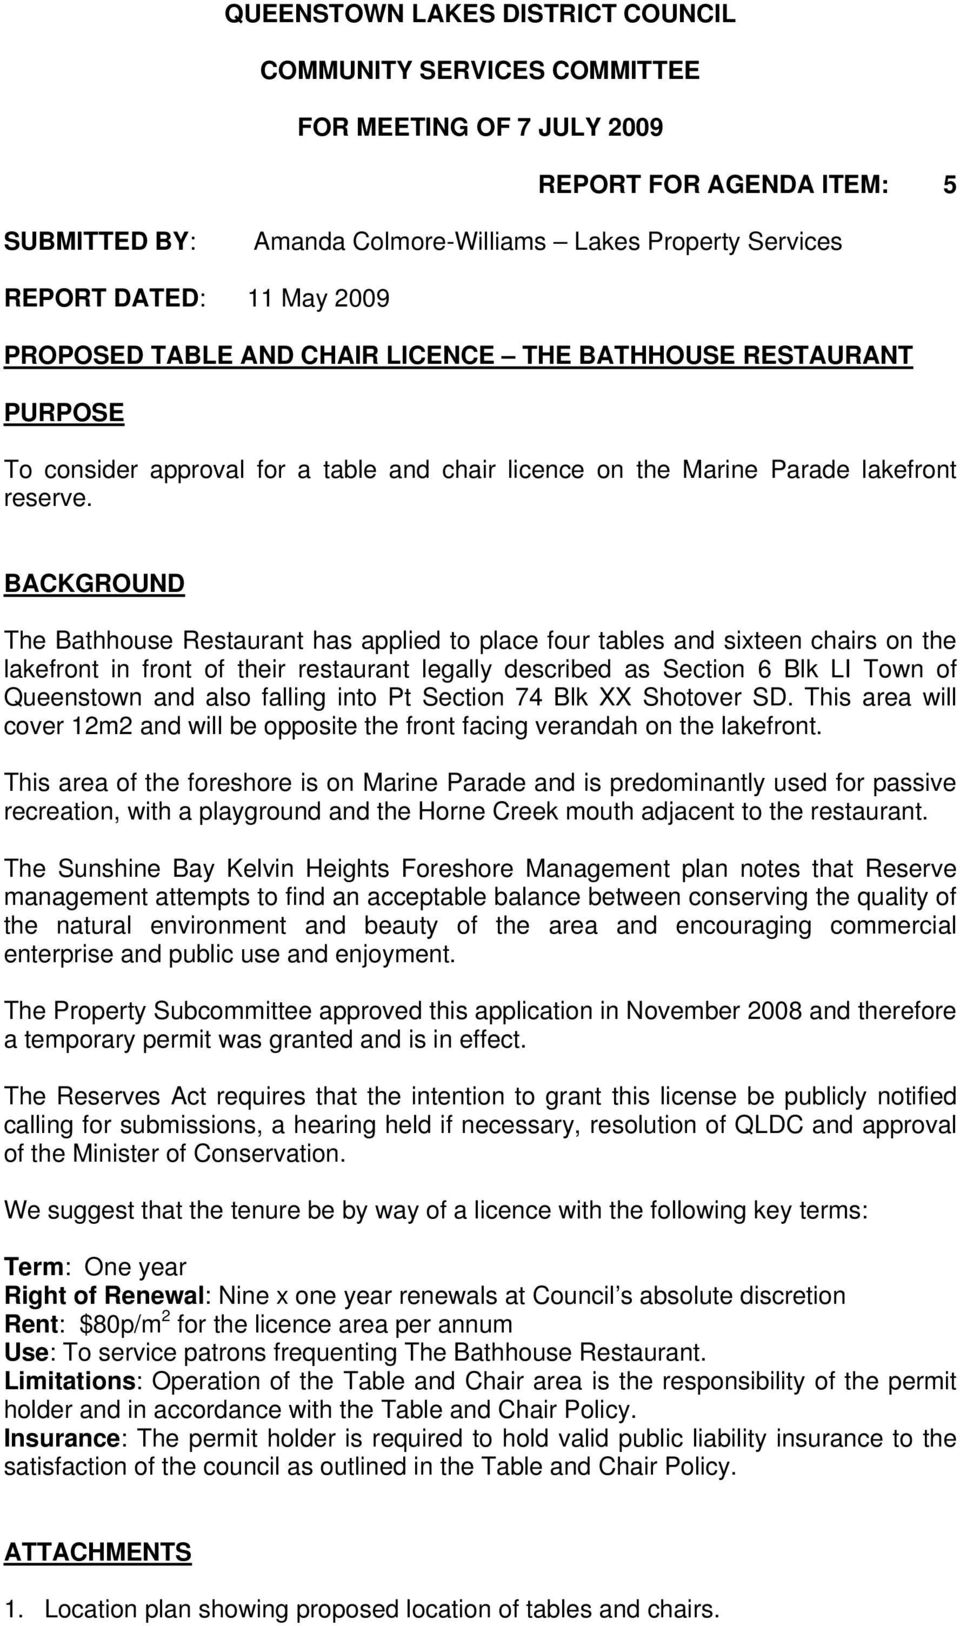 BACKGROUND The Bathhouse Restaurant has applied to place four tables and sixteen chairs on the lakefront in front of their restaurant legally described as Section 6 Blk LI Town of Queenstown and also